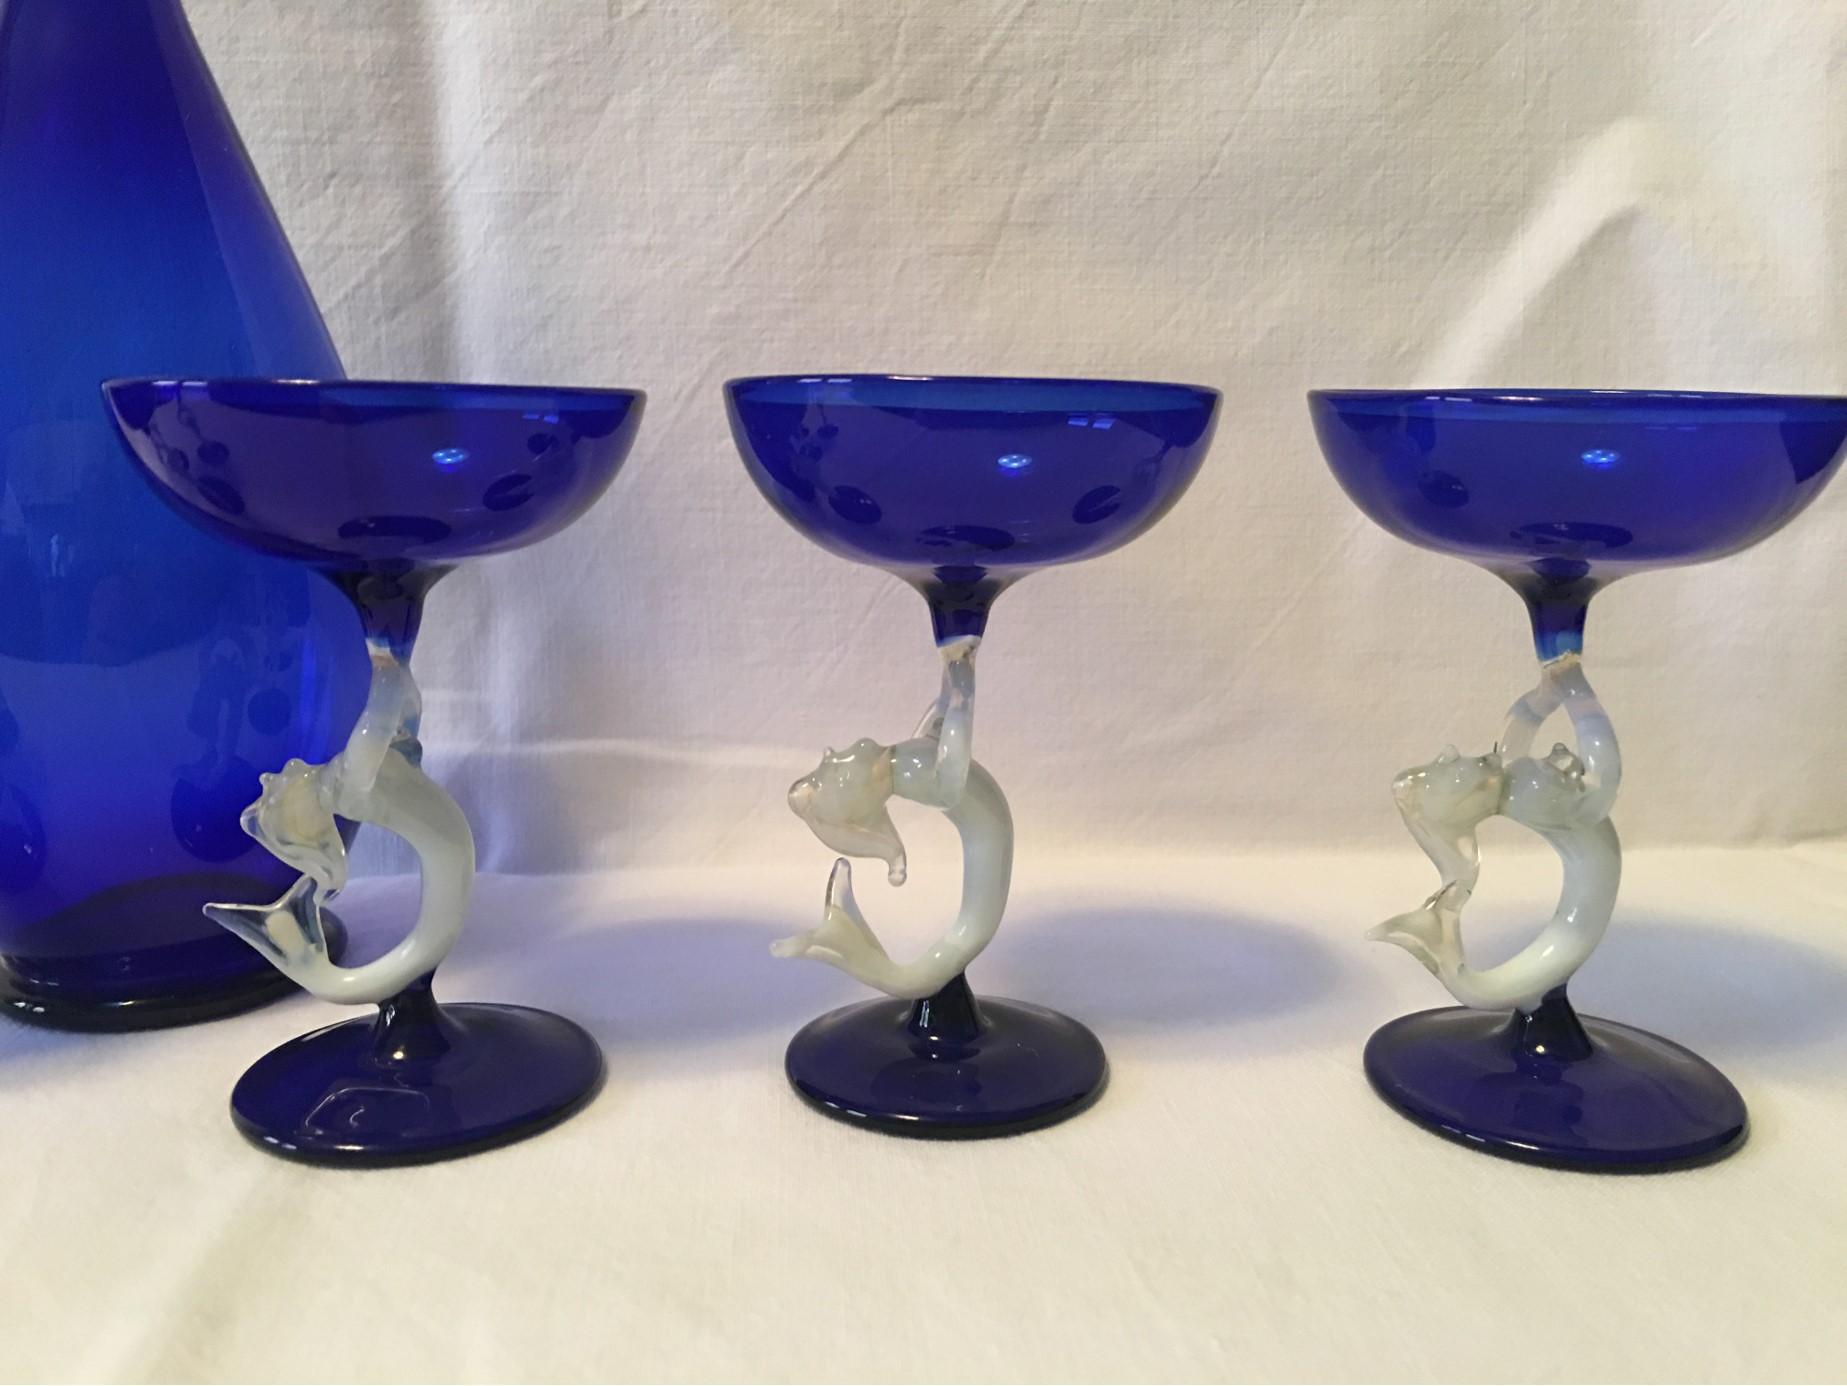 A lovely blue and white 1950s Mermaid Liqueur set in the beautiful Bimini style. The handle and tops are depictions of a Mermaid. Since every glass is handmade there are minuscule differences in each glass. The Carafe is 9.25 inches high with a